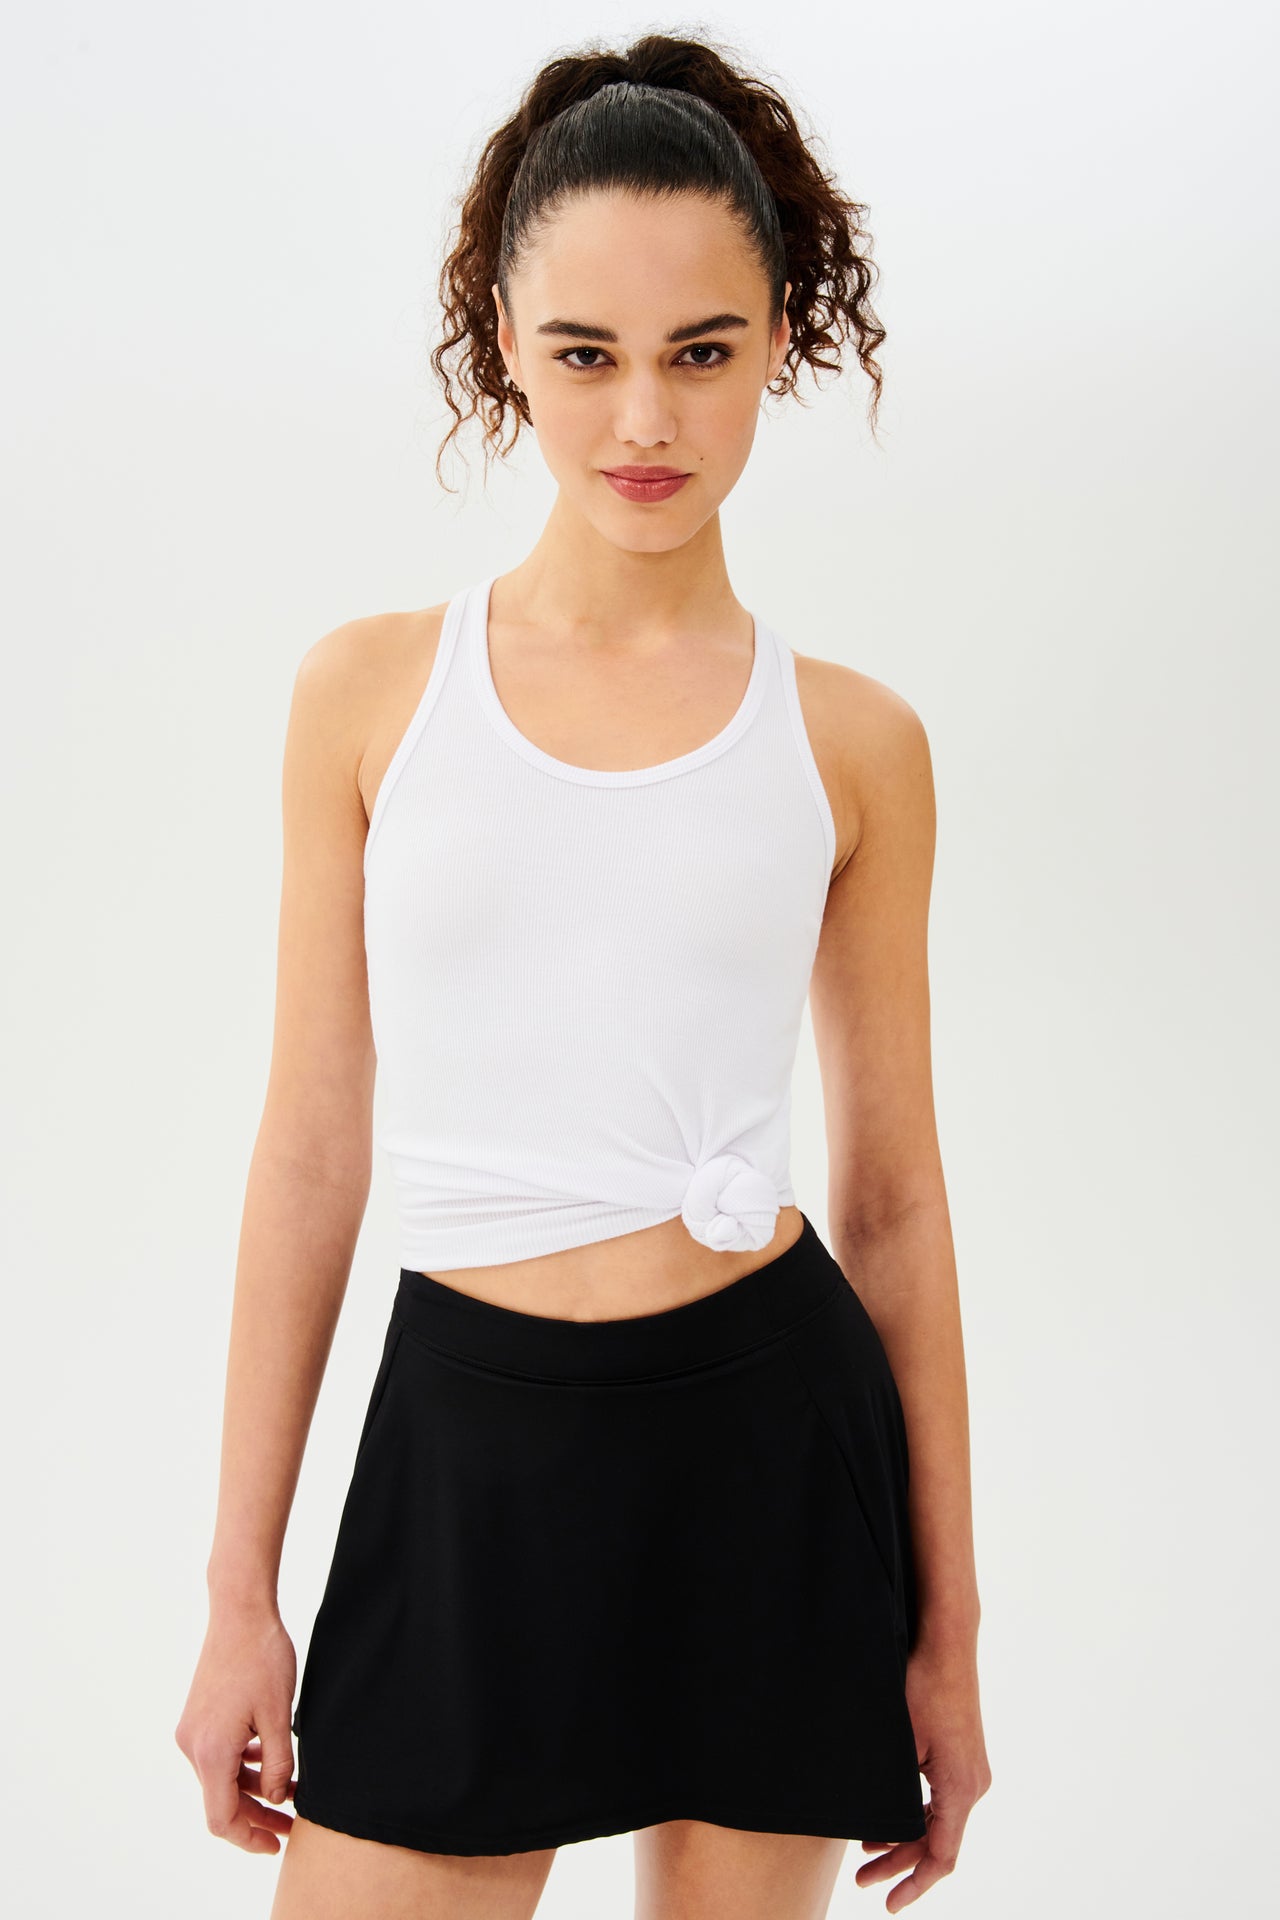 Front view woman with dark curly hair in a ponytail wearing a white tank top with a tied knot and black skort 